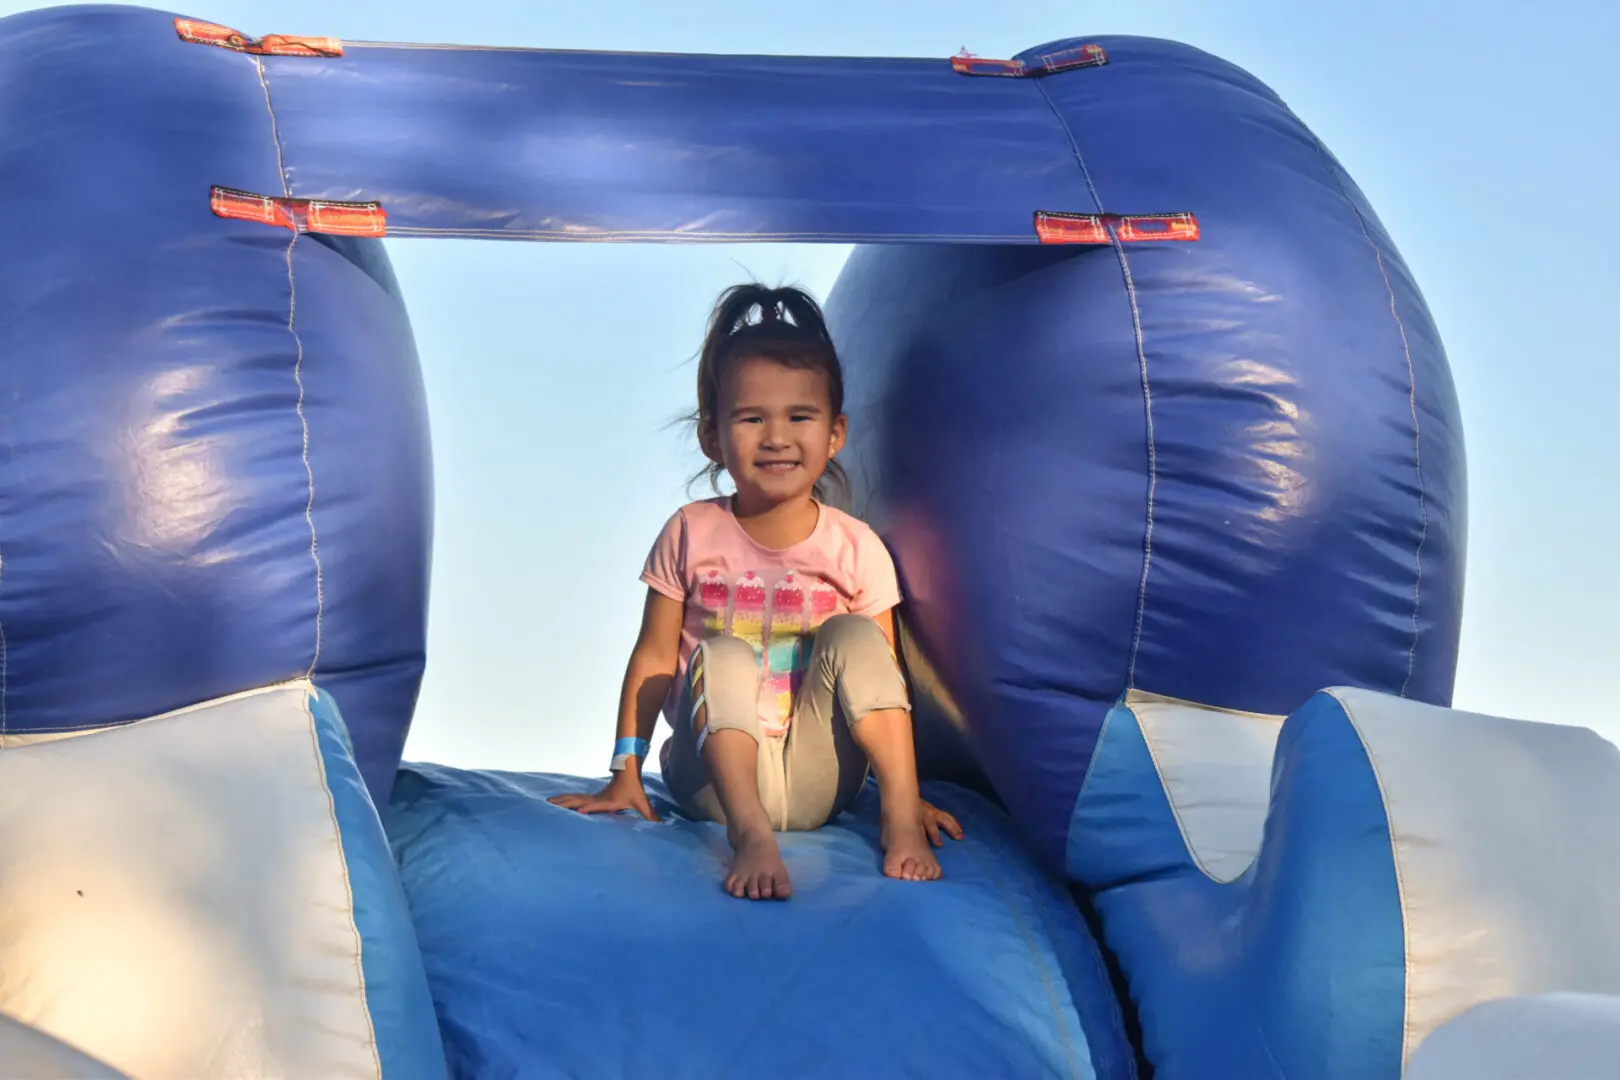 a young girl on an inflatable slide